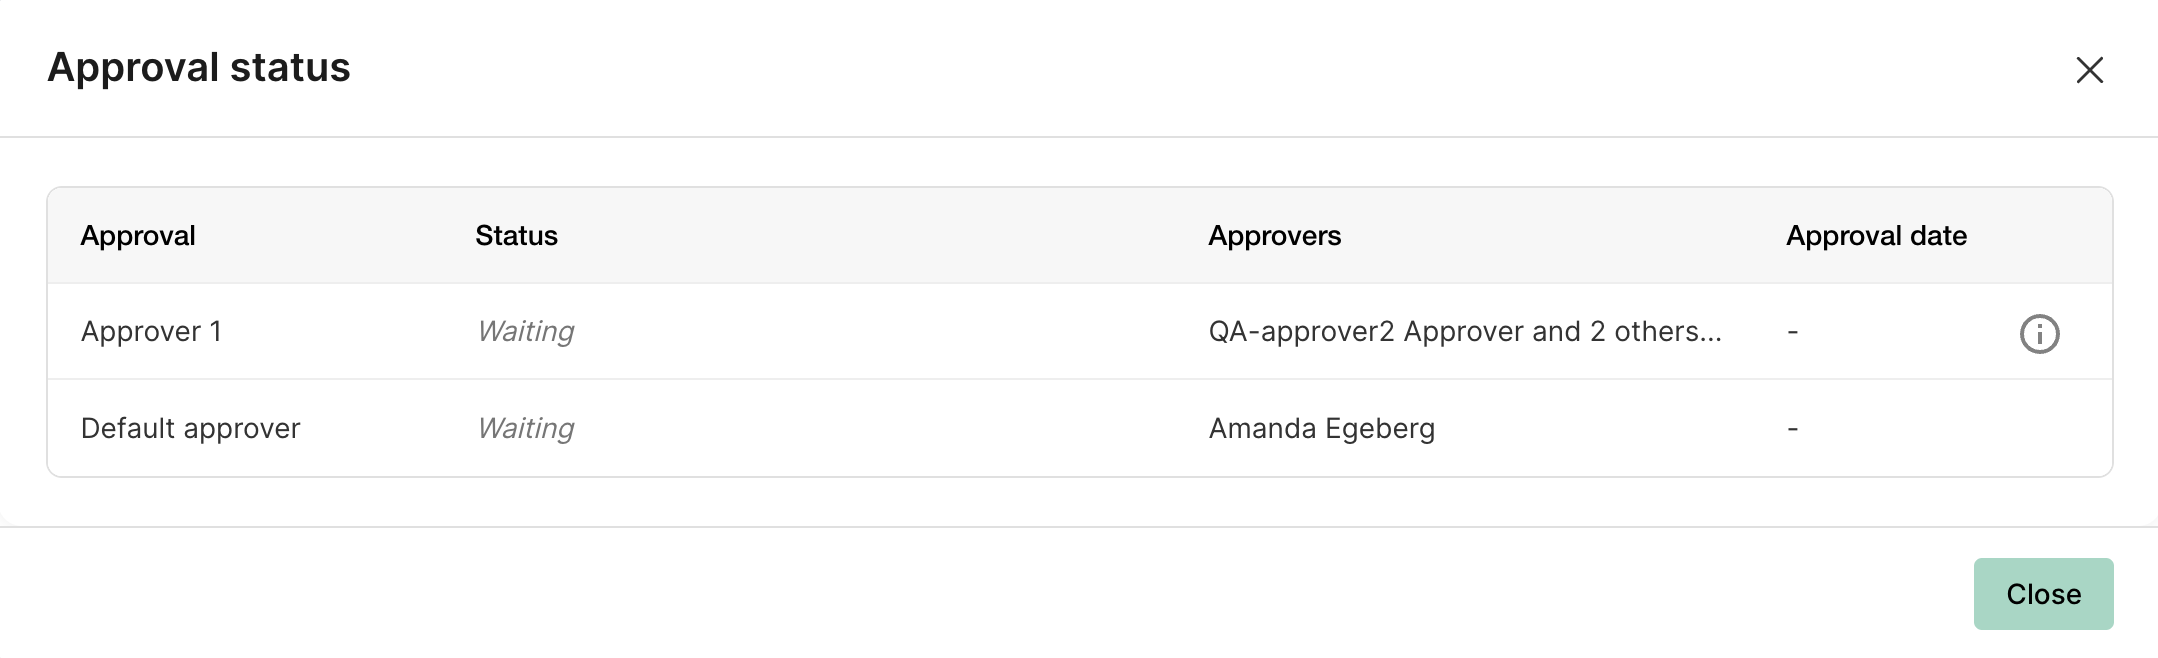 3approval_status